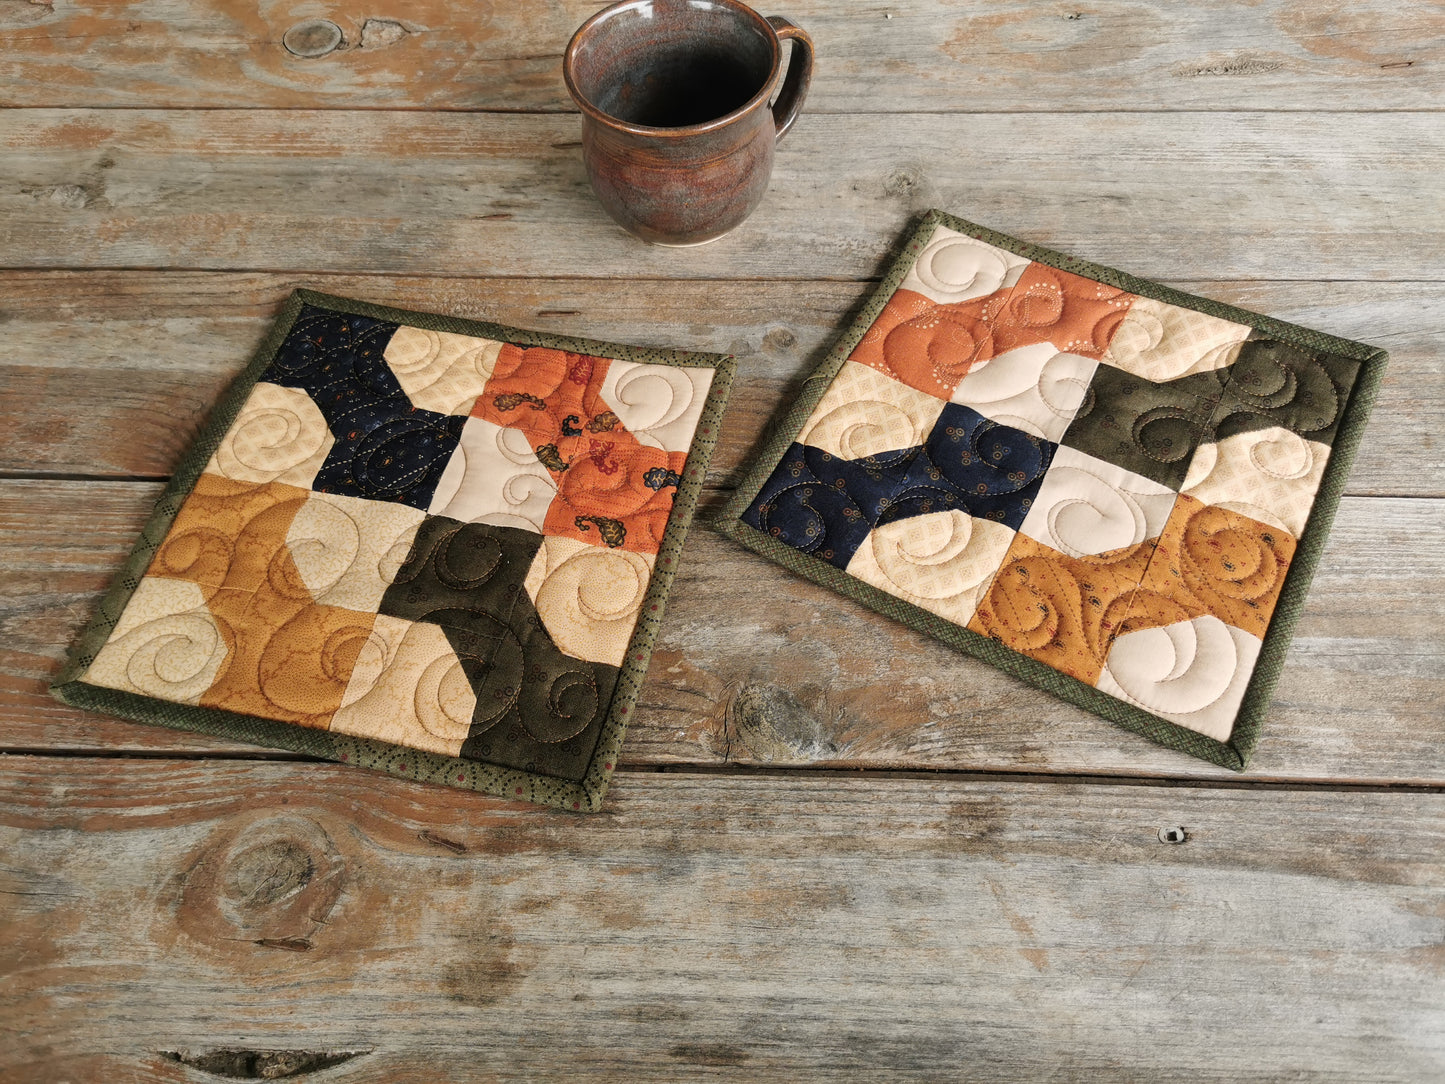 Each quilted patchwork potholder is made up of four bowties, all oriented in the same direction, each in a different color. Rustic country colors include forest green, navy, burnt orange, and gold.  Background is made with various  beige fabrics giving a scrappy look. Each potholder is bound with various forest green fabrics for another scrappy element. Fabric prints feature paisleys in various scales and designs. 